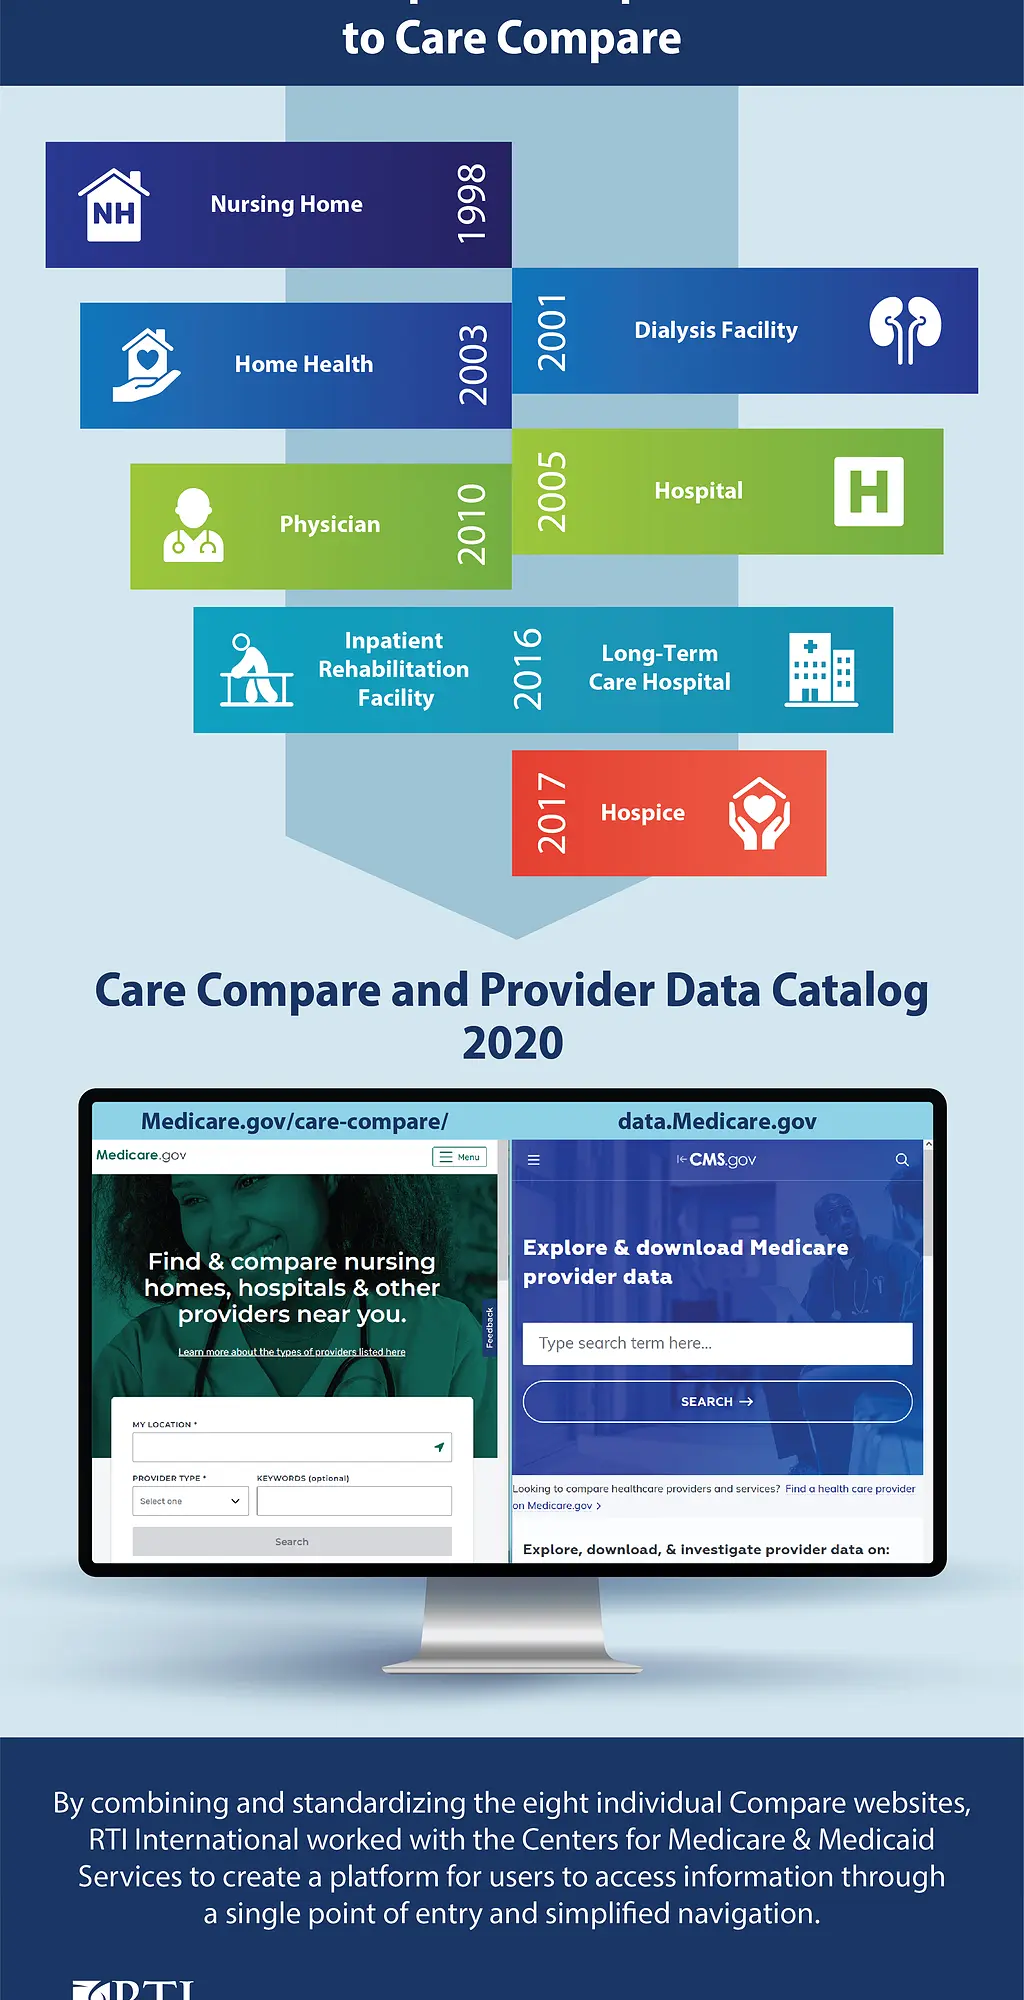 Graphic shows the transition from provider-specific websites to Care Compare.